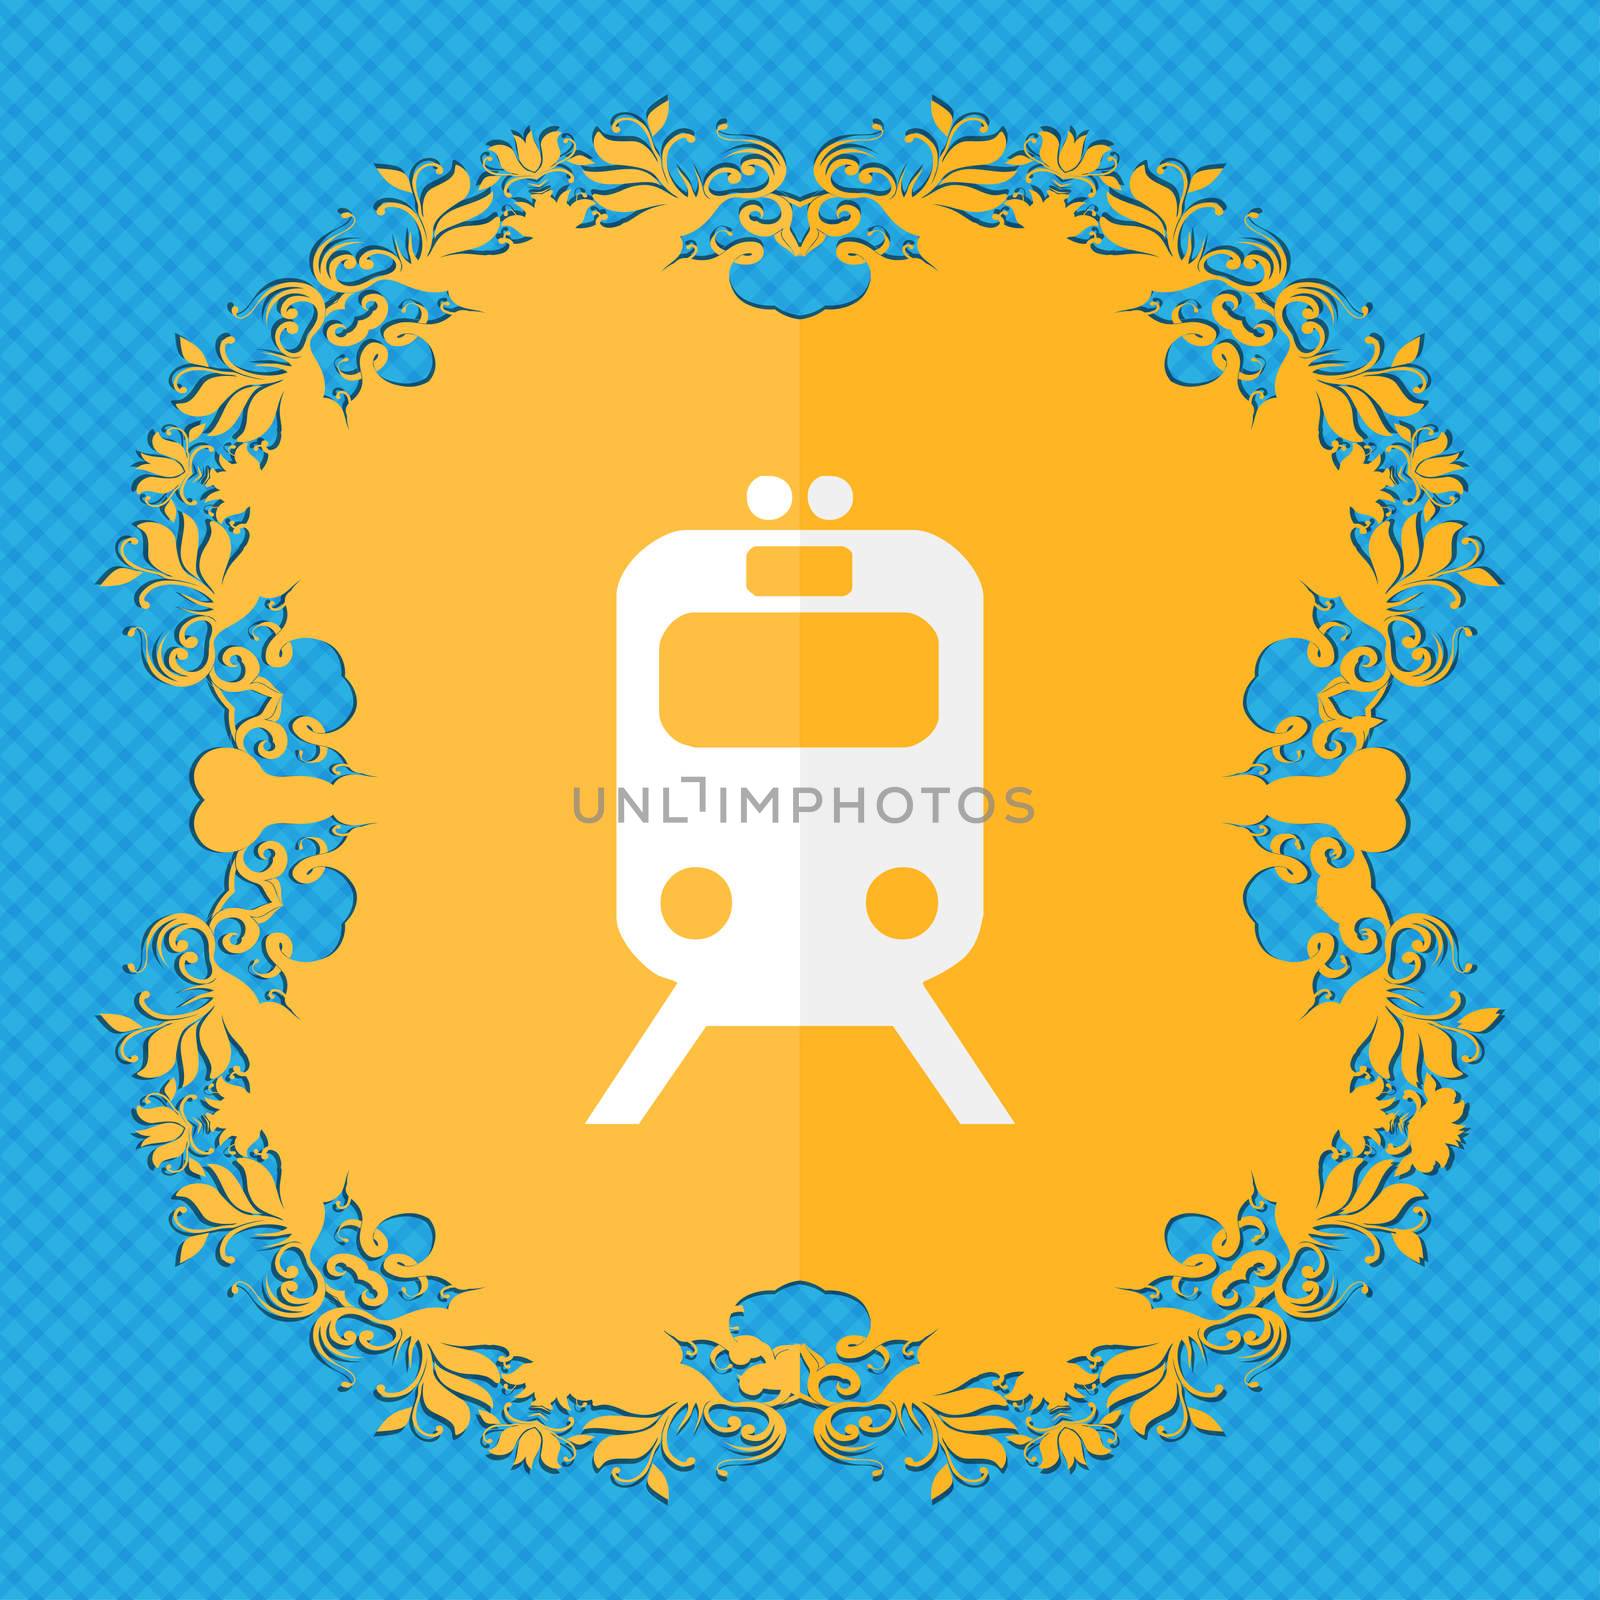 train. Floral flat design on a blue abstract background with place for your text. illustration